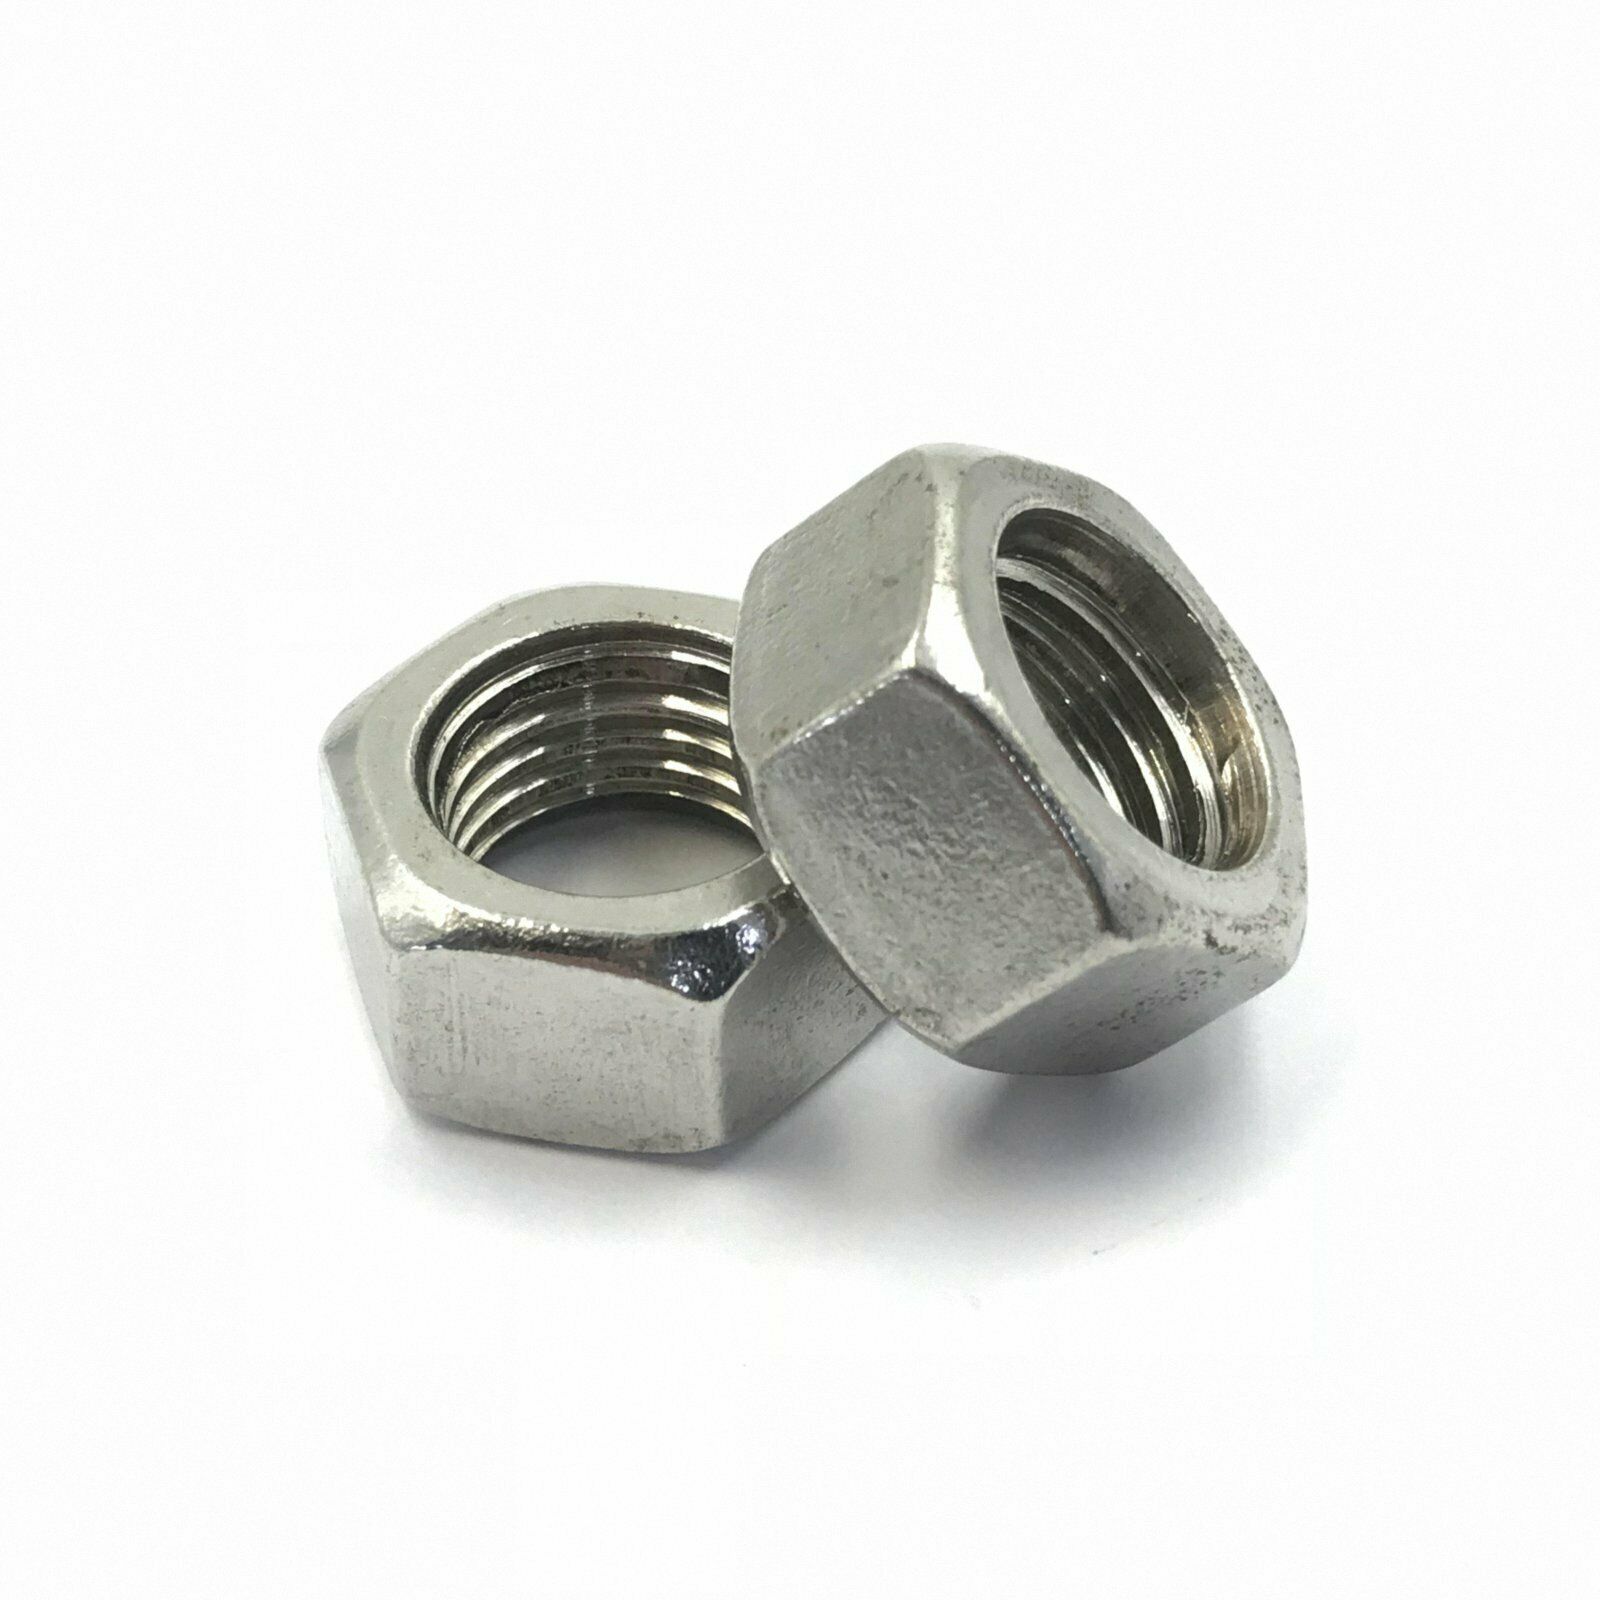 6Pcs Metric Right hand Thread Stainless Steel Hex Nut M14 x 2 [M_M_S]